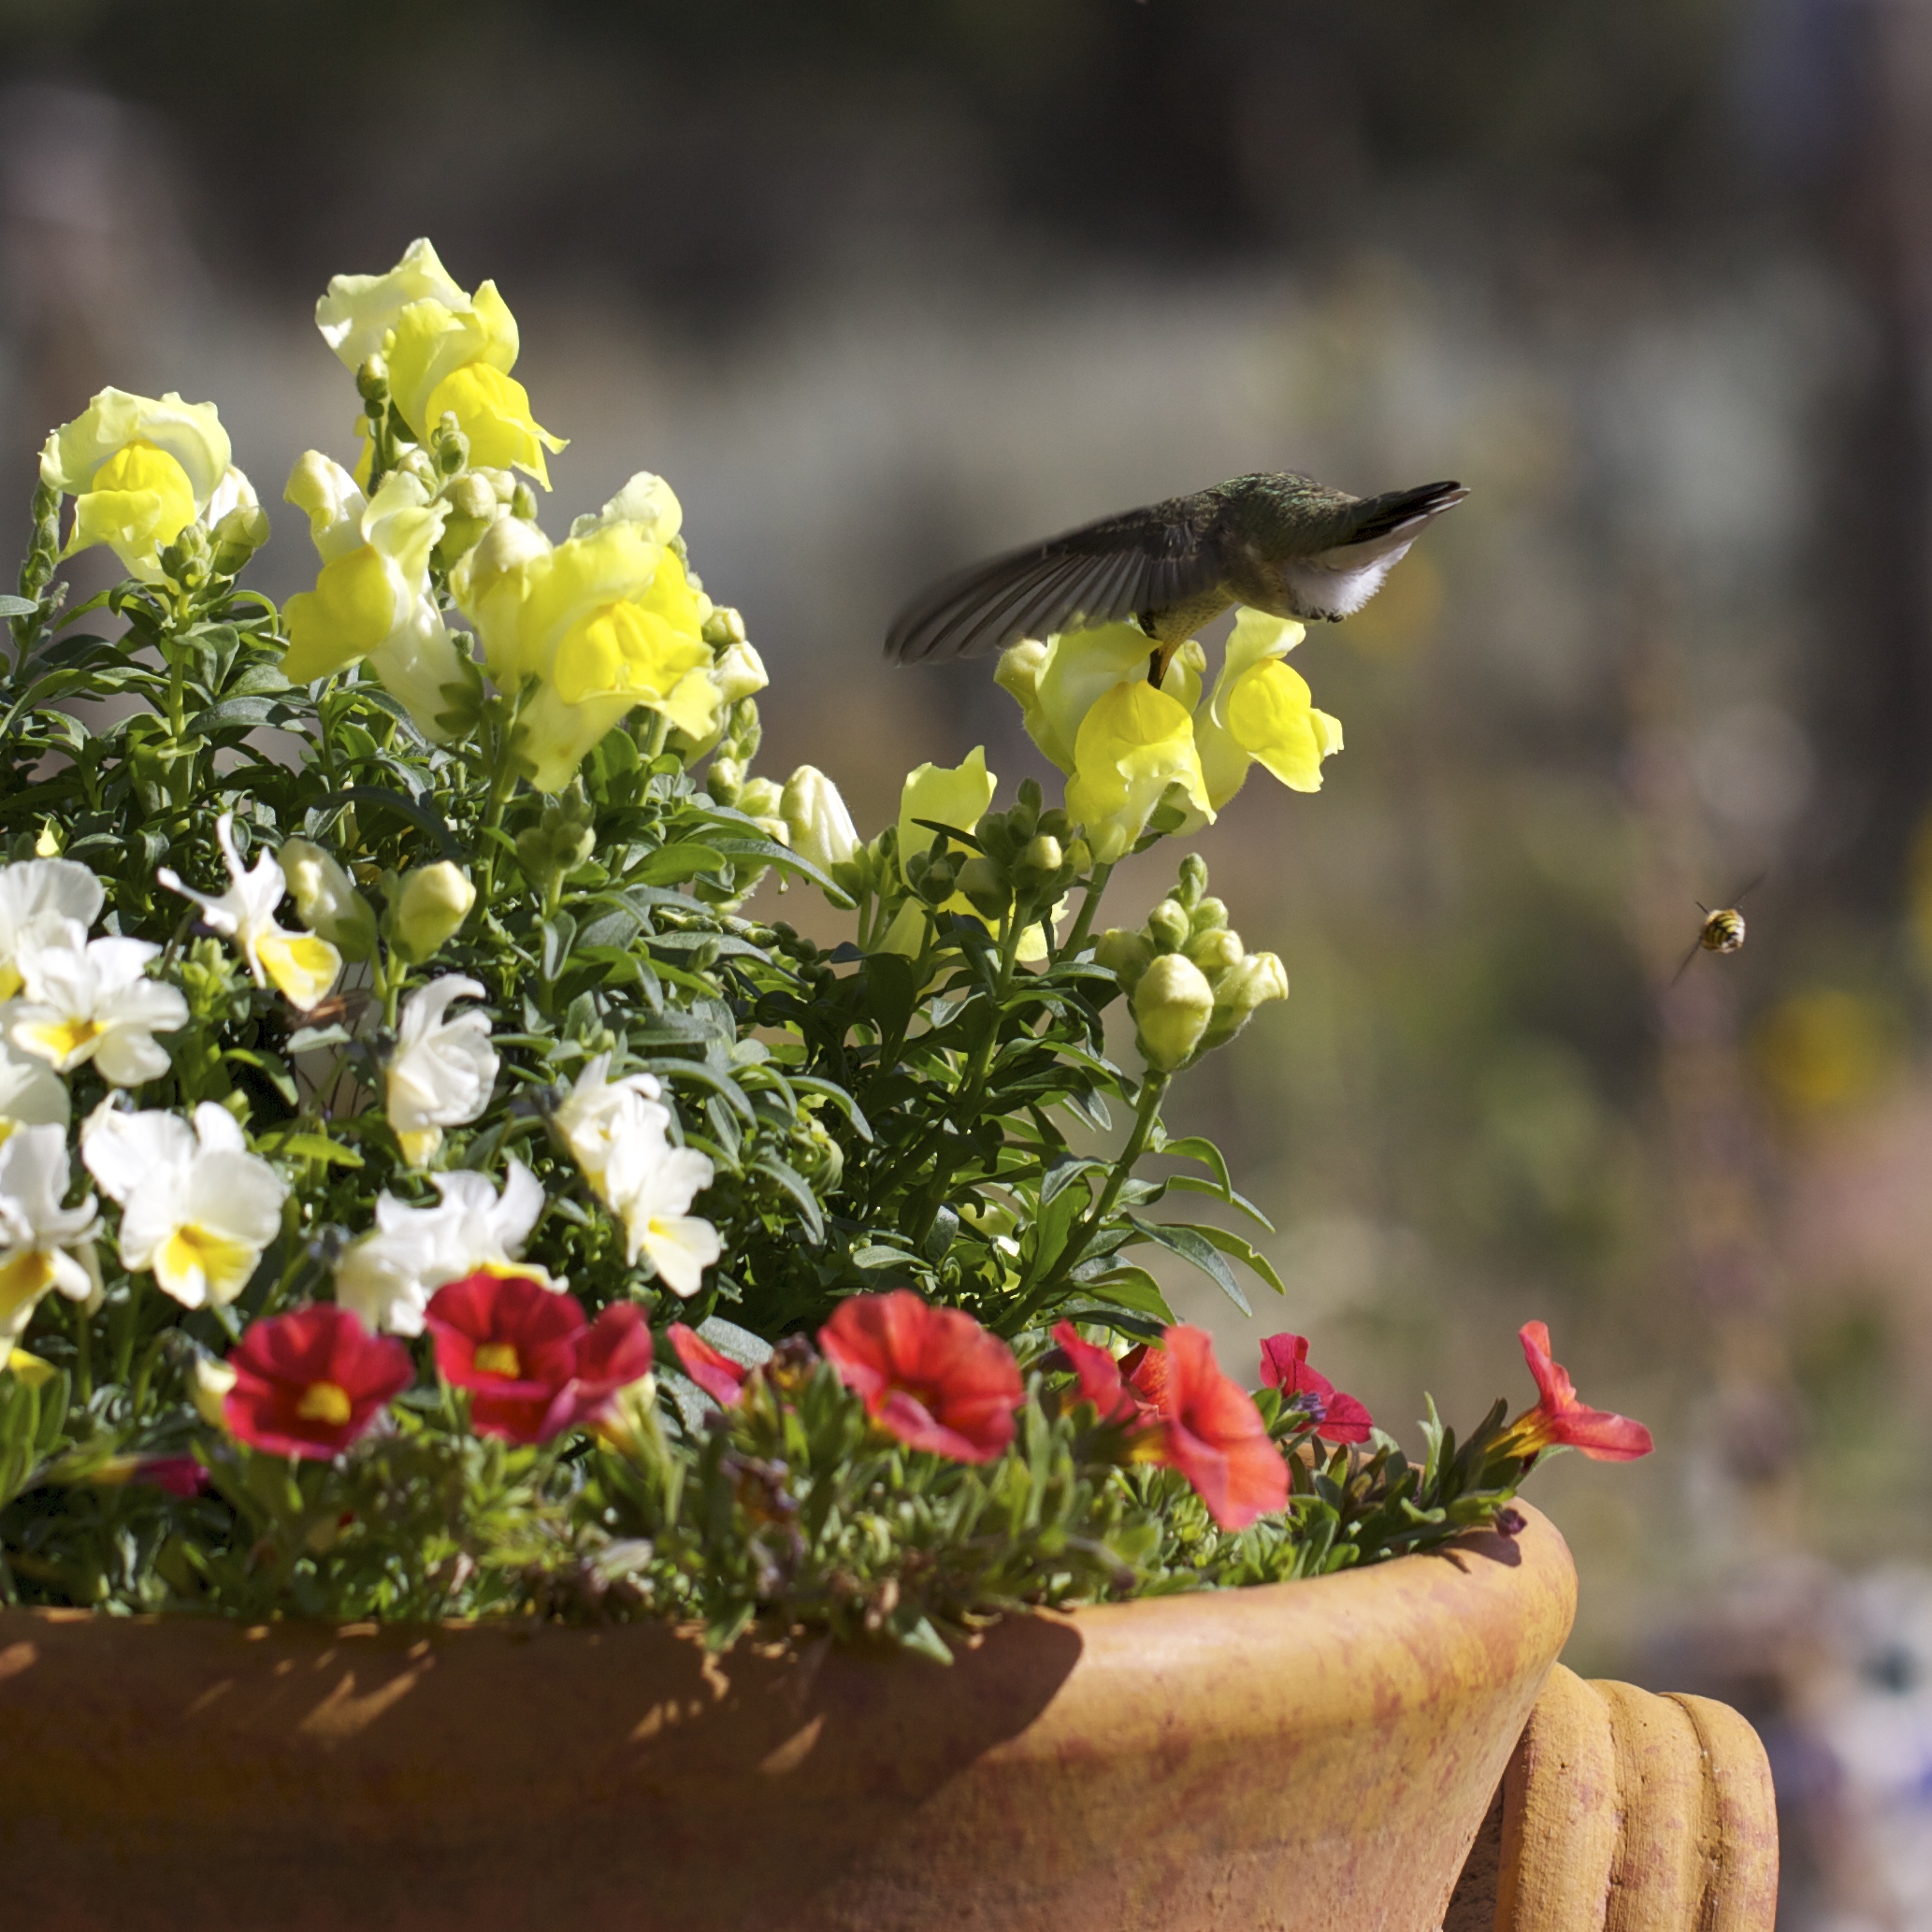 Young hummingbirds find the potted flowers appealing. This one circled the yellow snapdragons sipping from several.